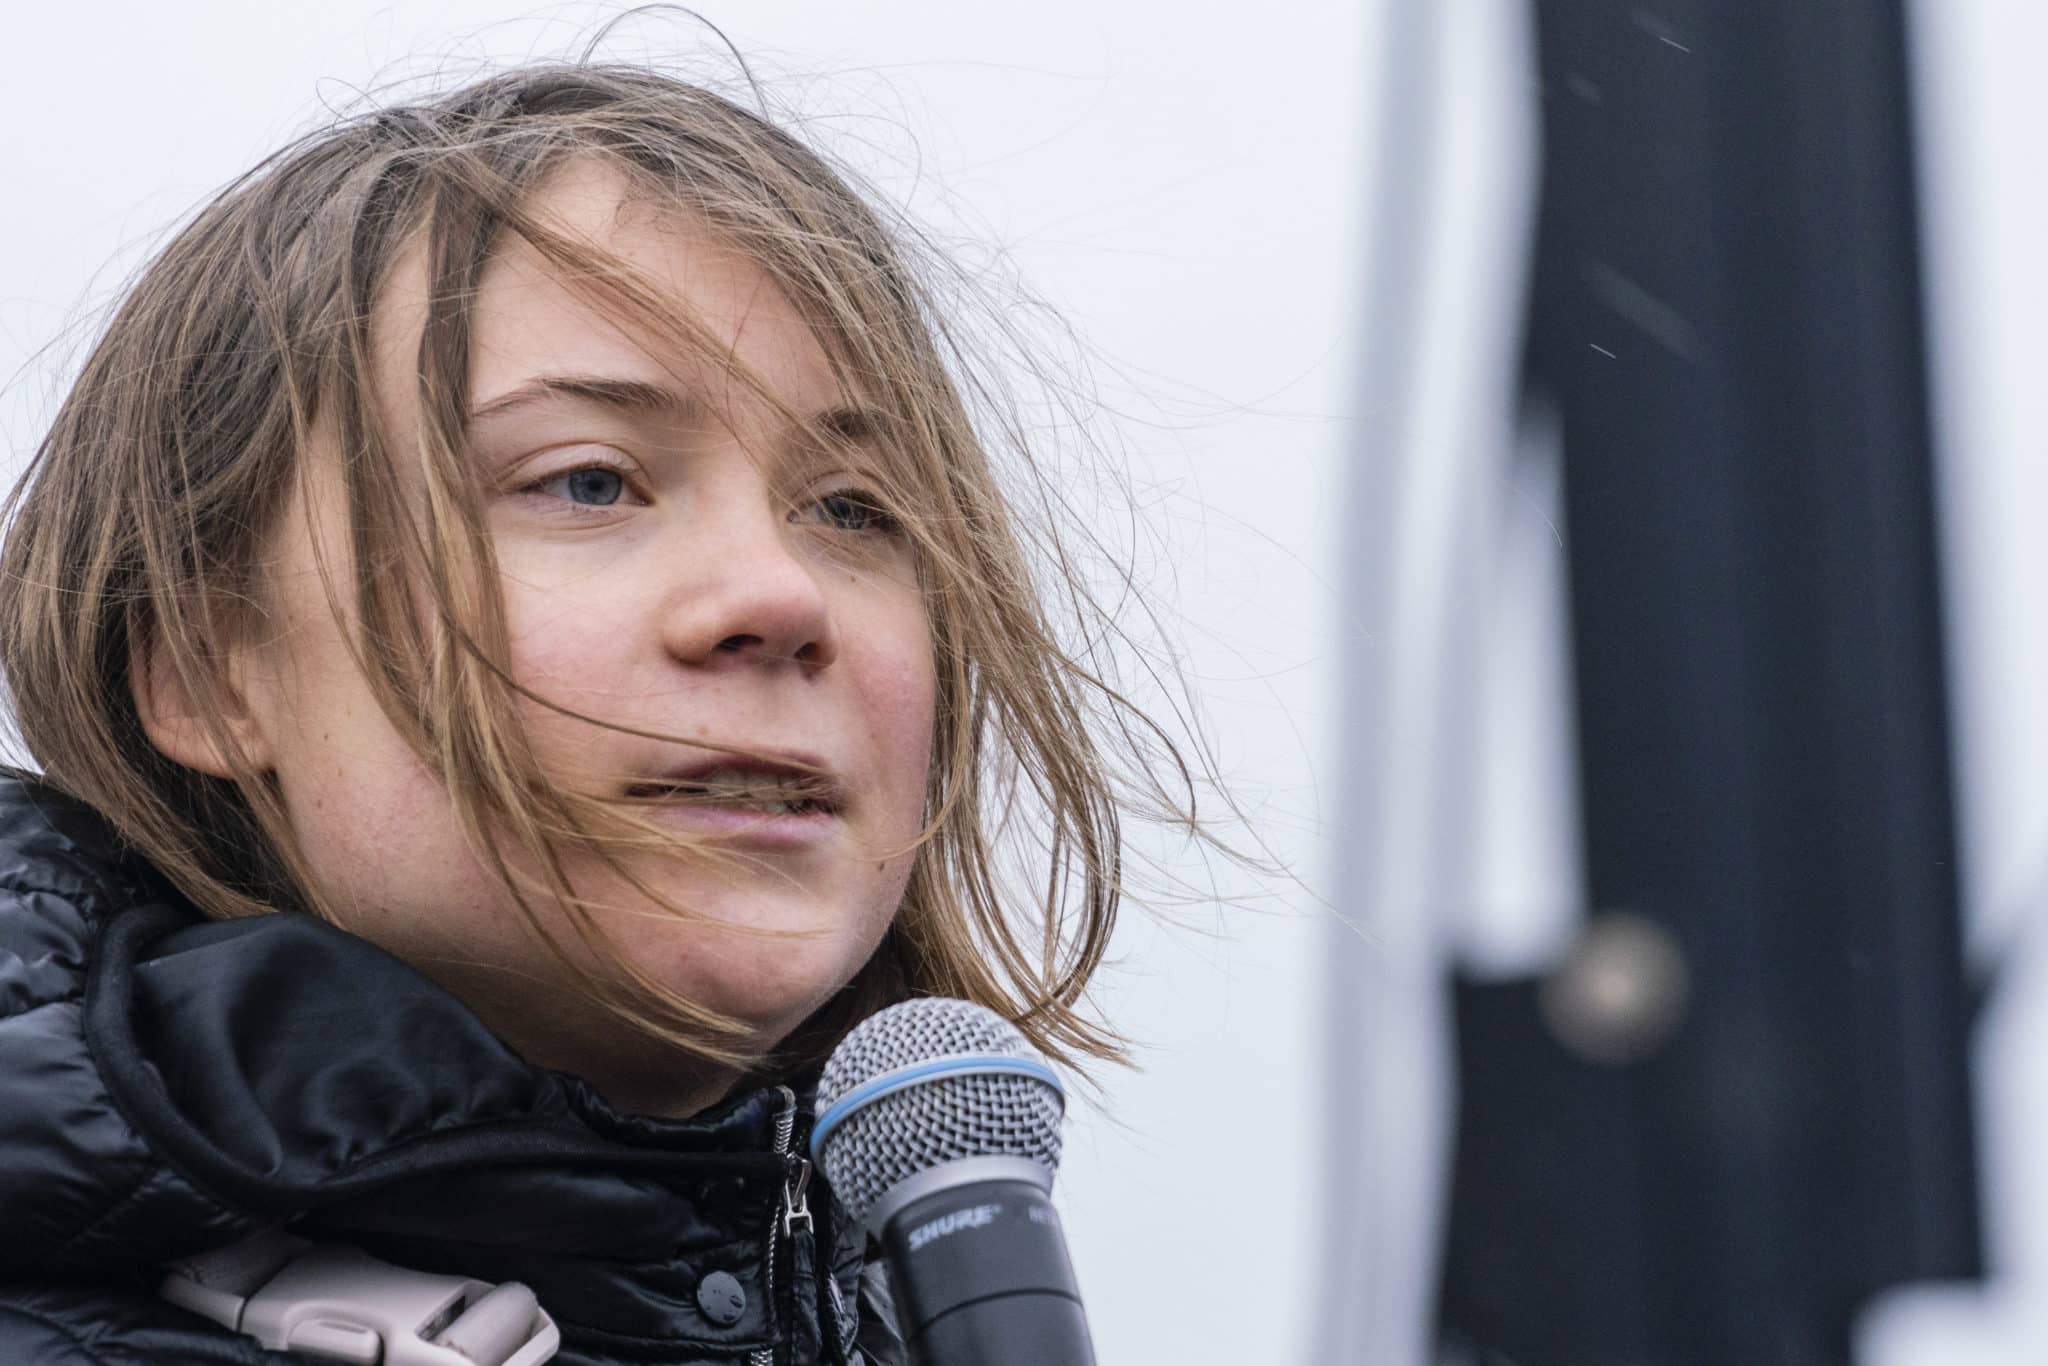 Greta Thunberg says Davos elite are prioritizing greed and short-term profits over people and the planet